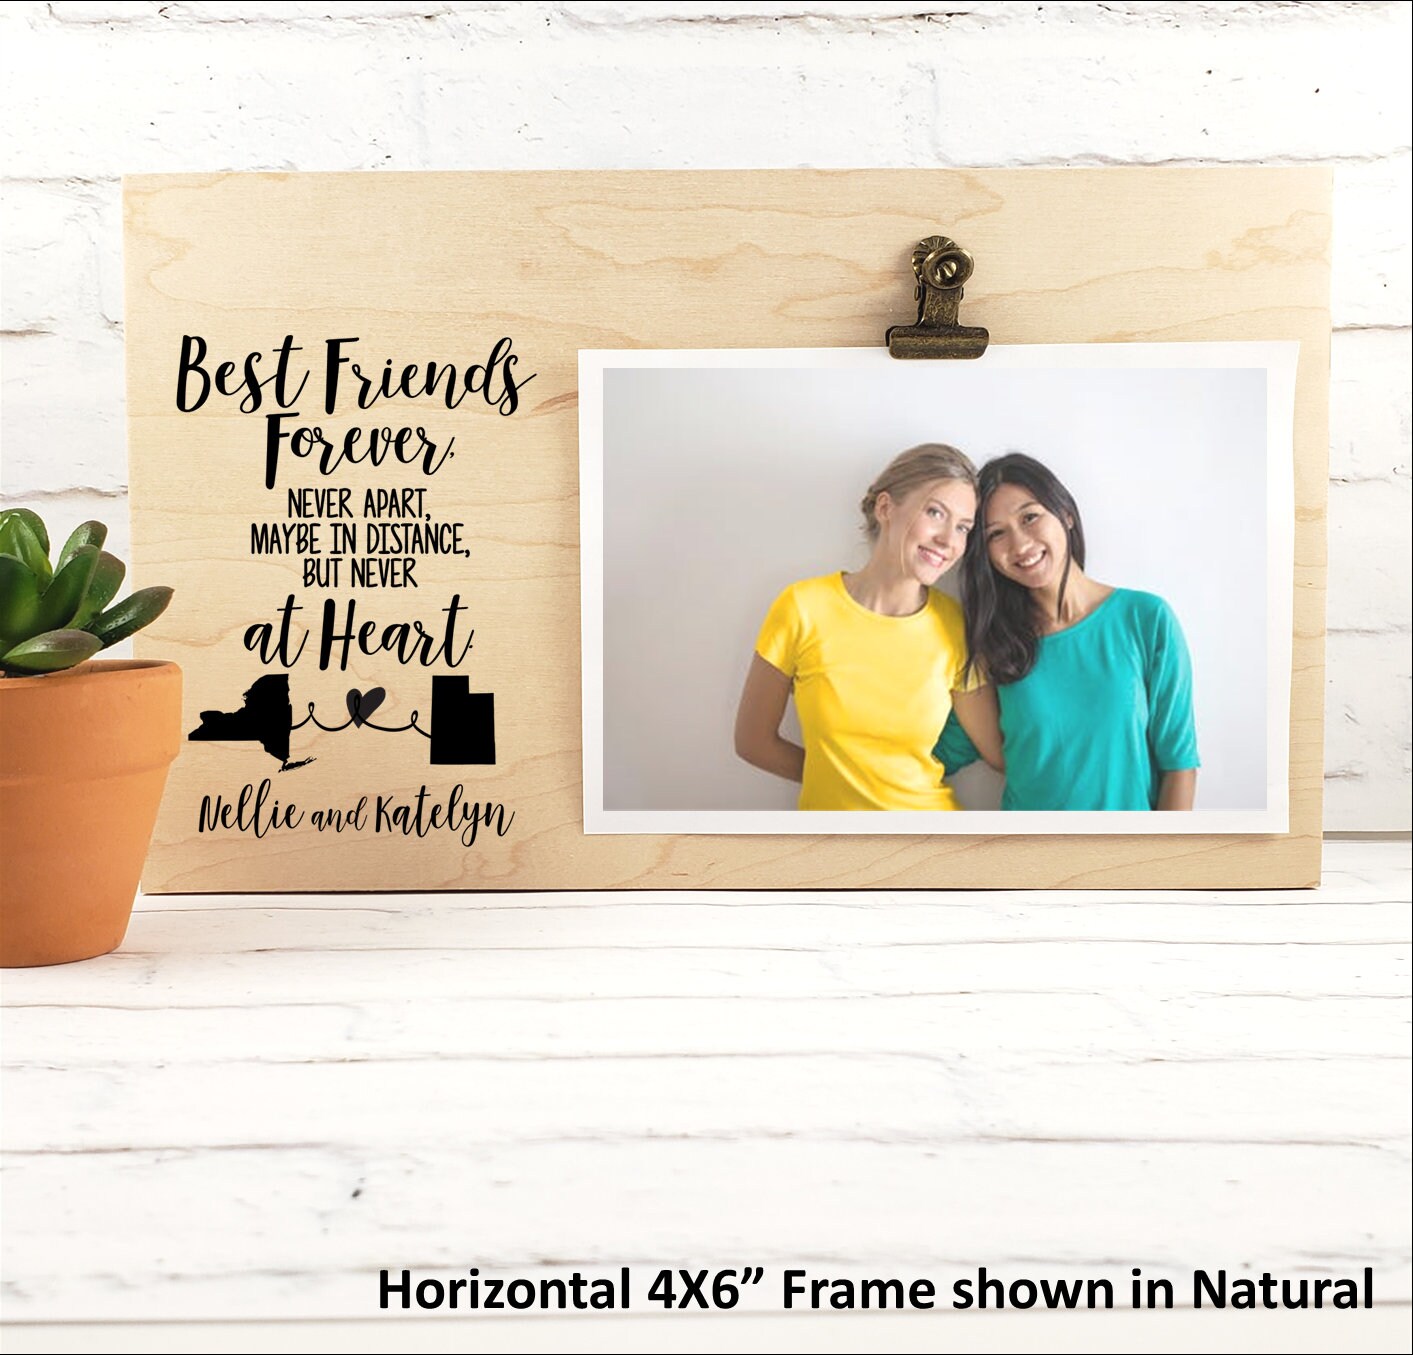 4x6 Picture Frame for Best Friend Picture Frame for Women, Birthday Gifts  for Friend Female, Forever Friends Photo Frame- Side By Side Or Miles Apart